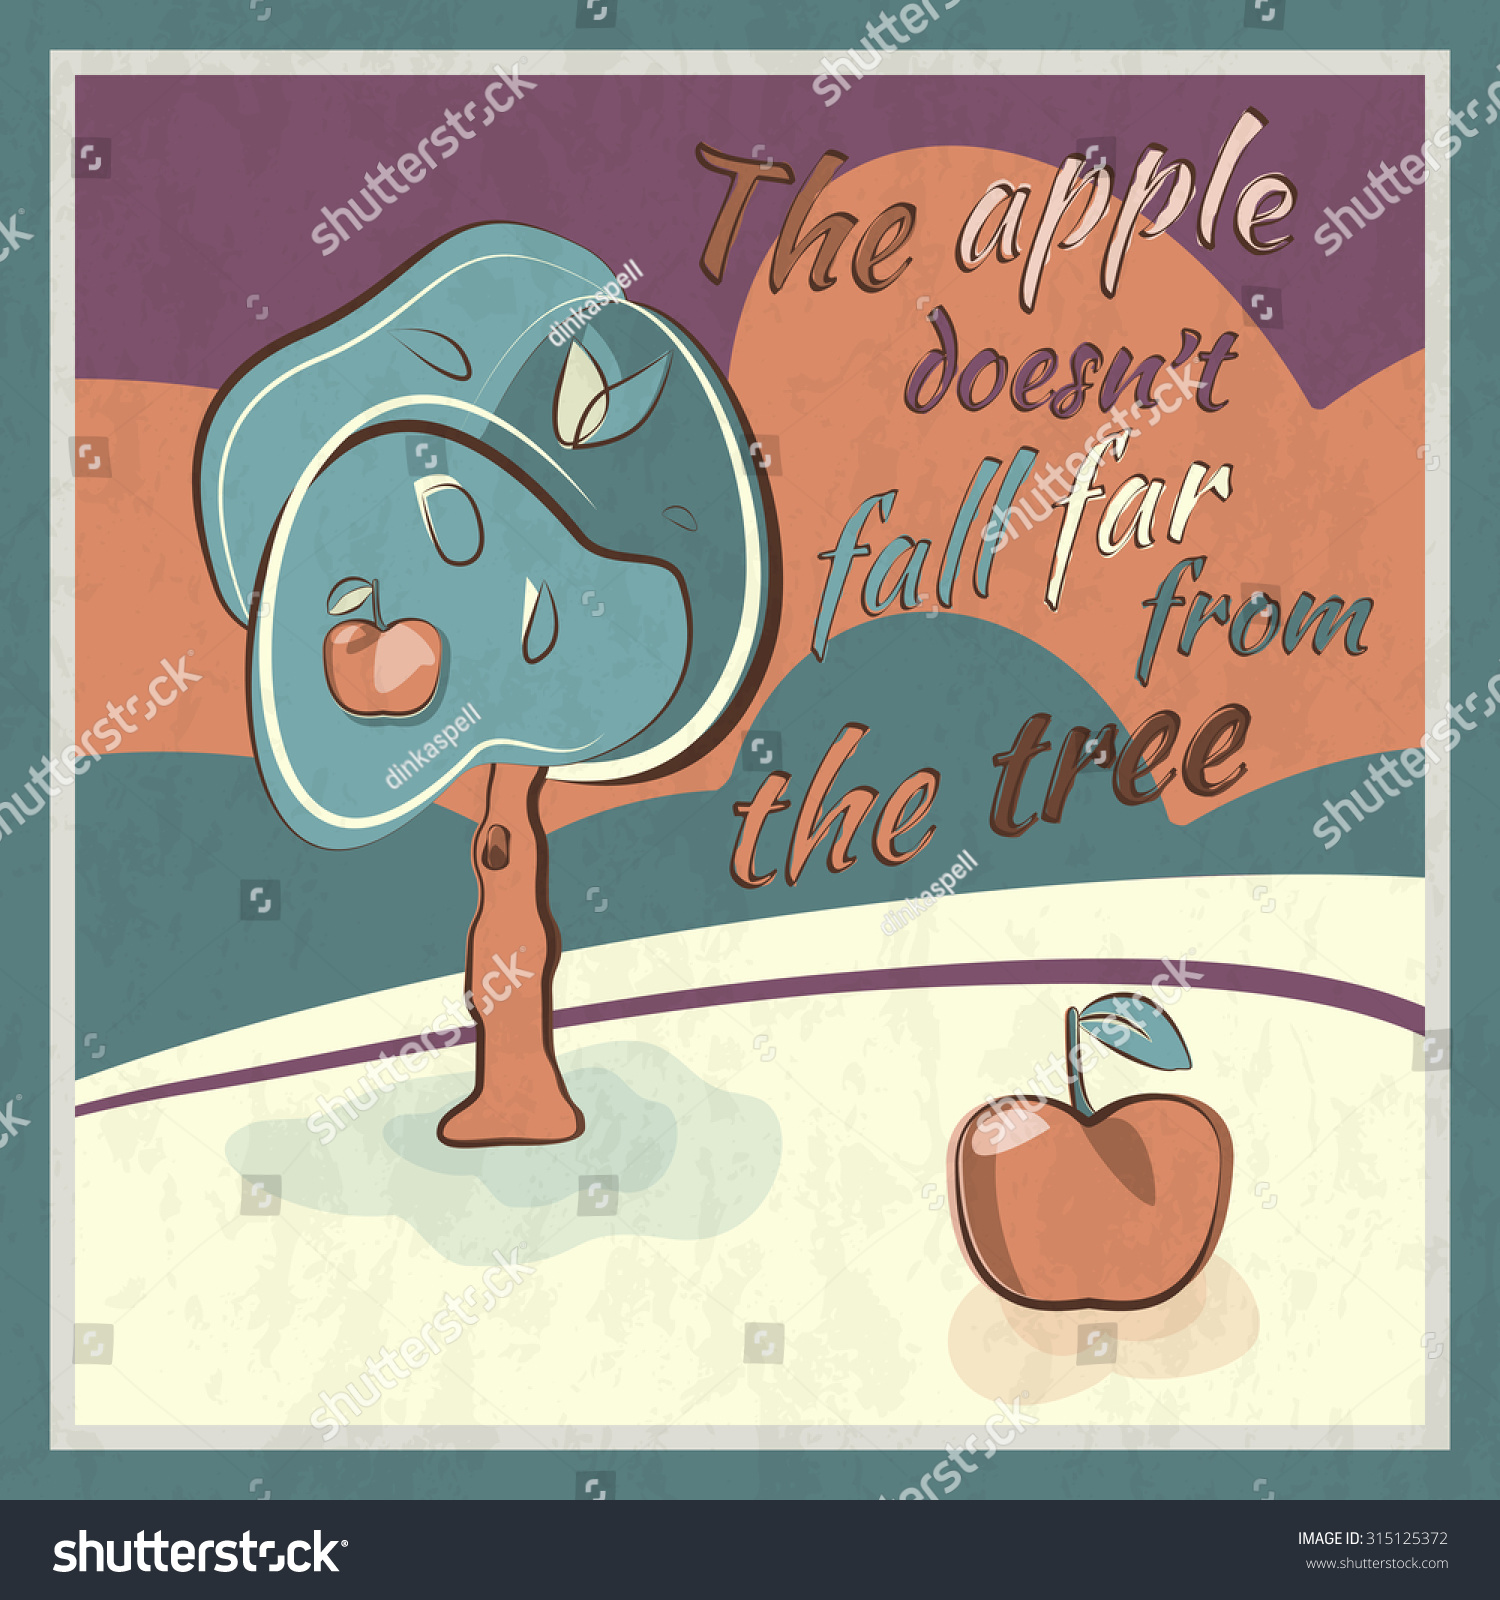 The Apple doesn’t Fall far from the Tree. Идиома the Apple never Falls far from the Tree. The Apple doesn't Fall. Idiom an Apple doesn't Fall far from the Tree.